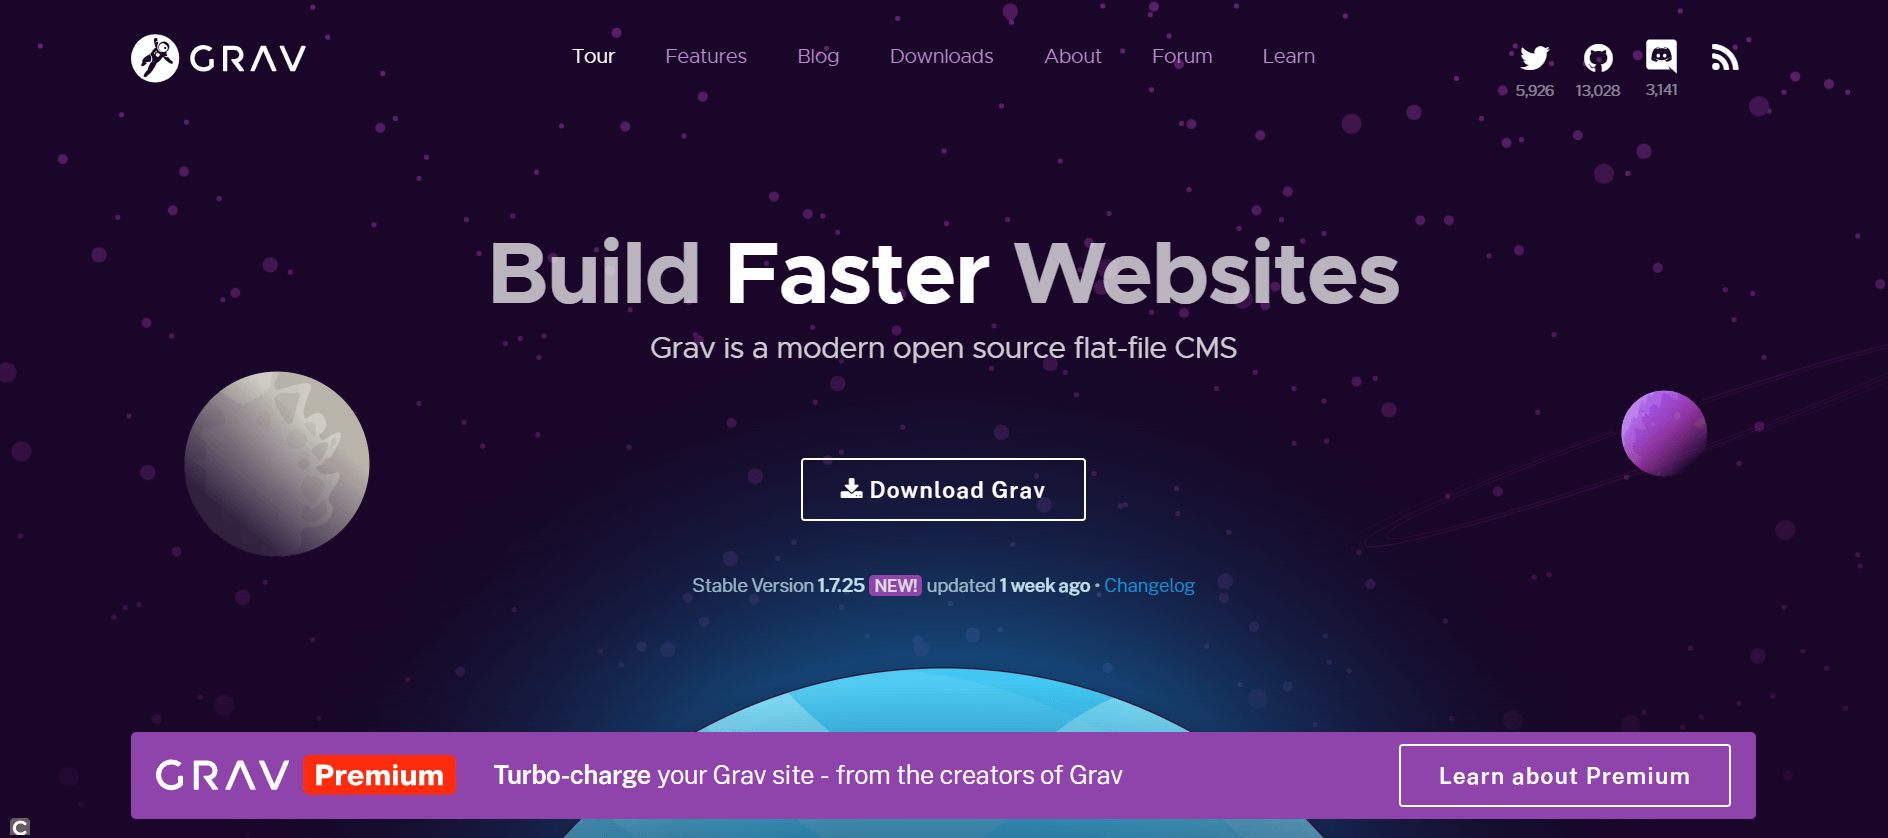 Homepage of the Grav project